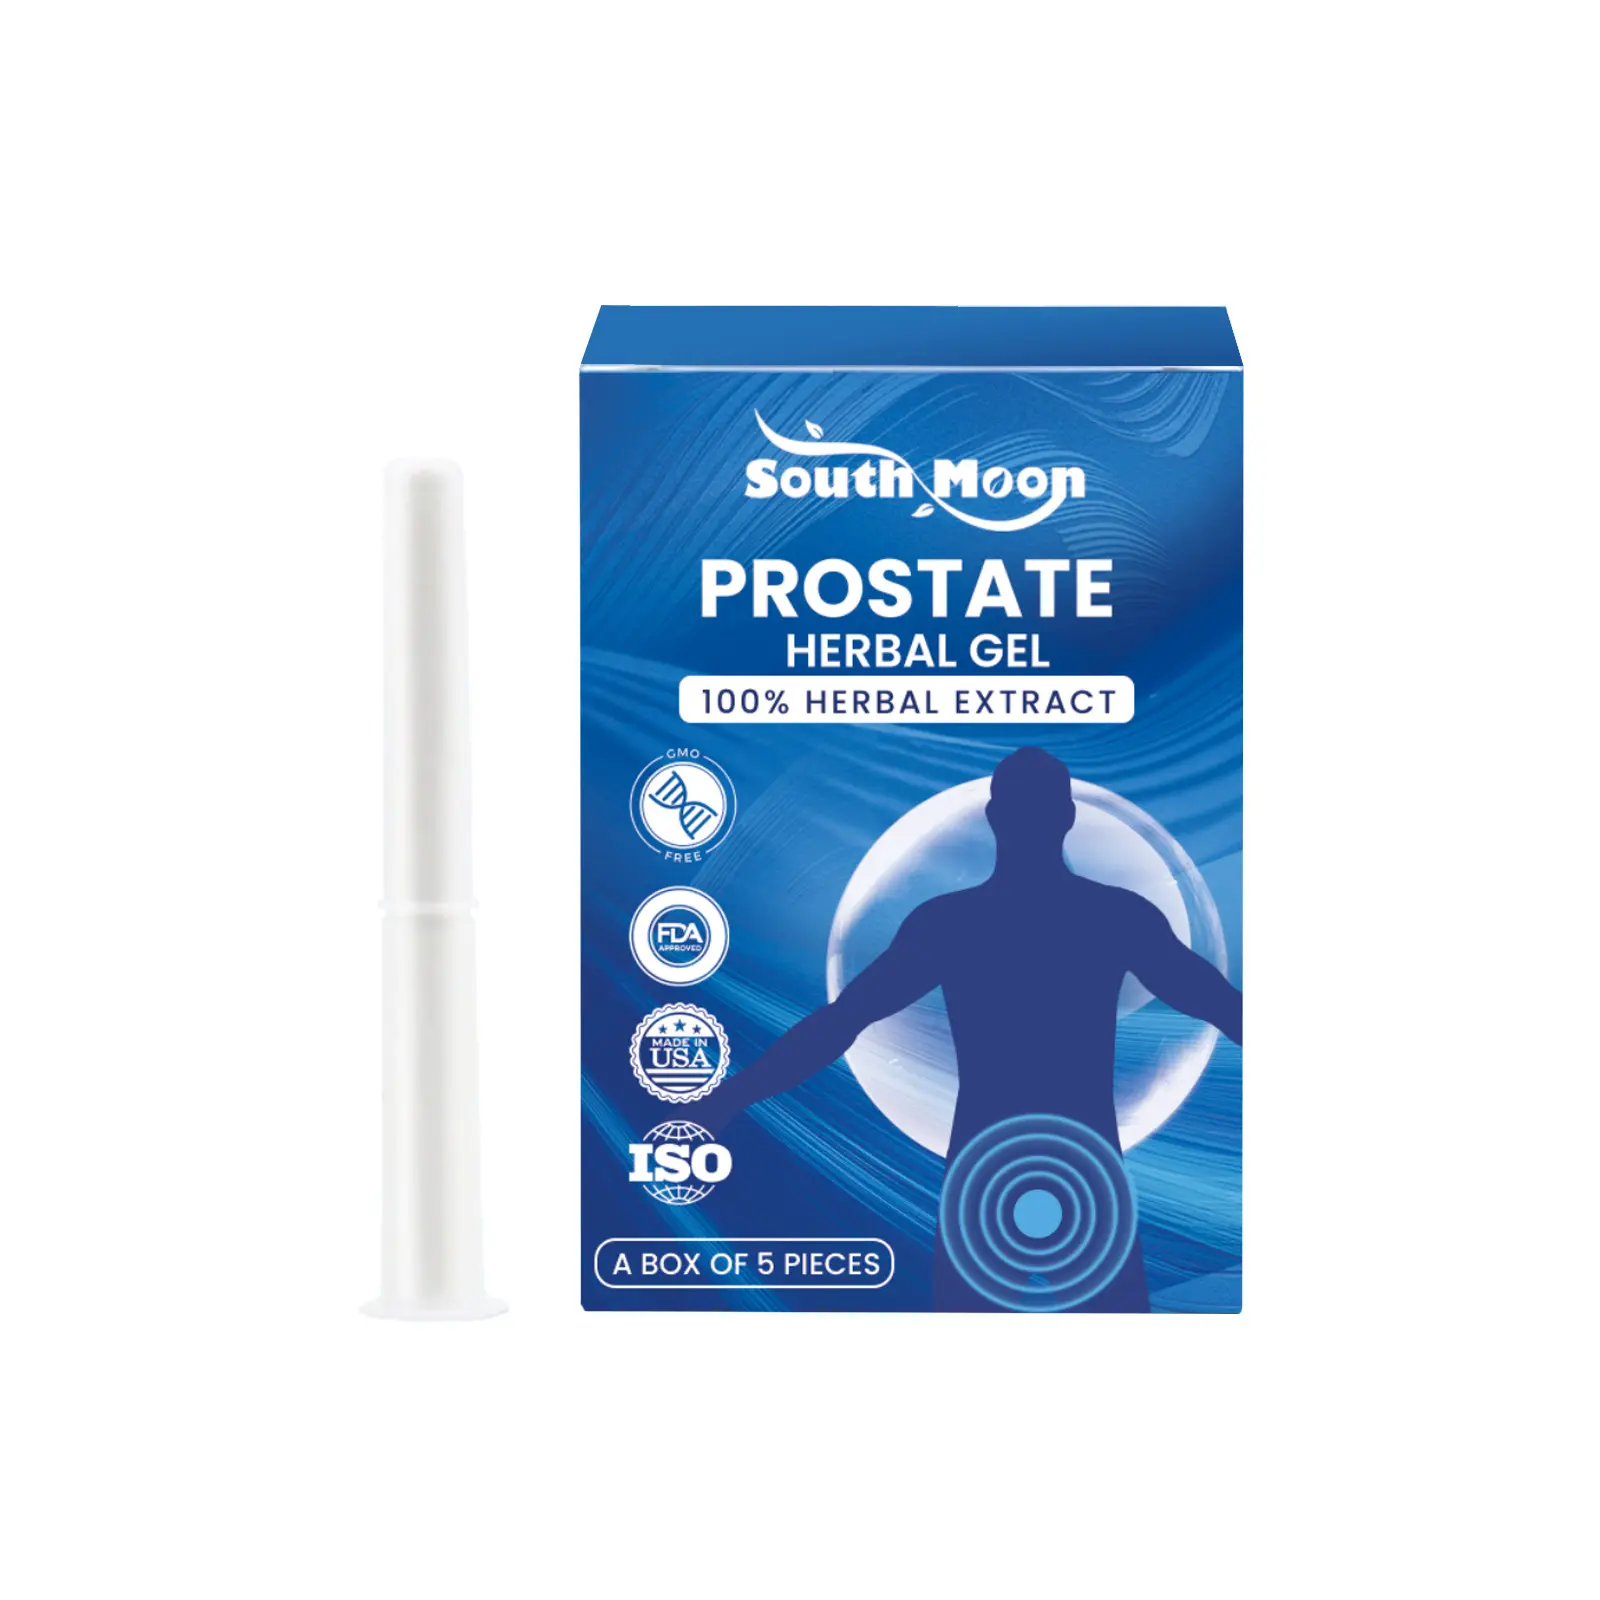 South Moon Prostate herbal gel Relieve prostate discomfort men's Yang Care Health Care body care